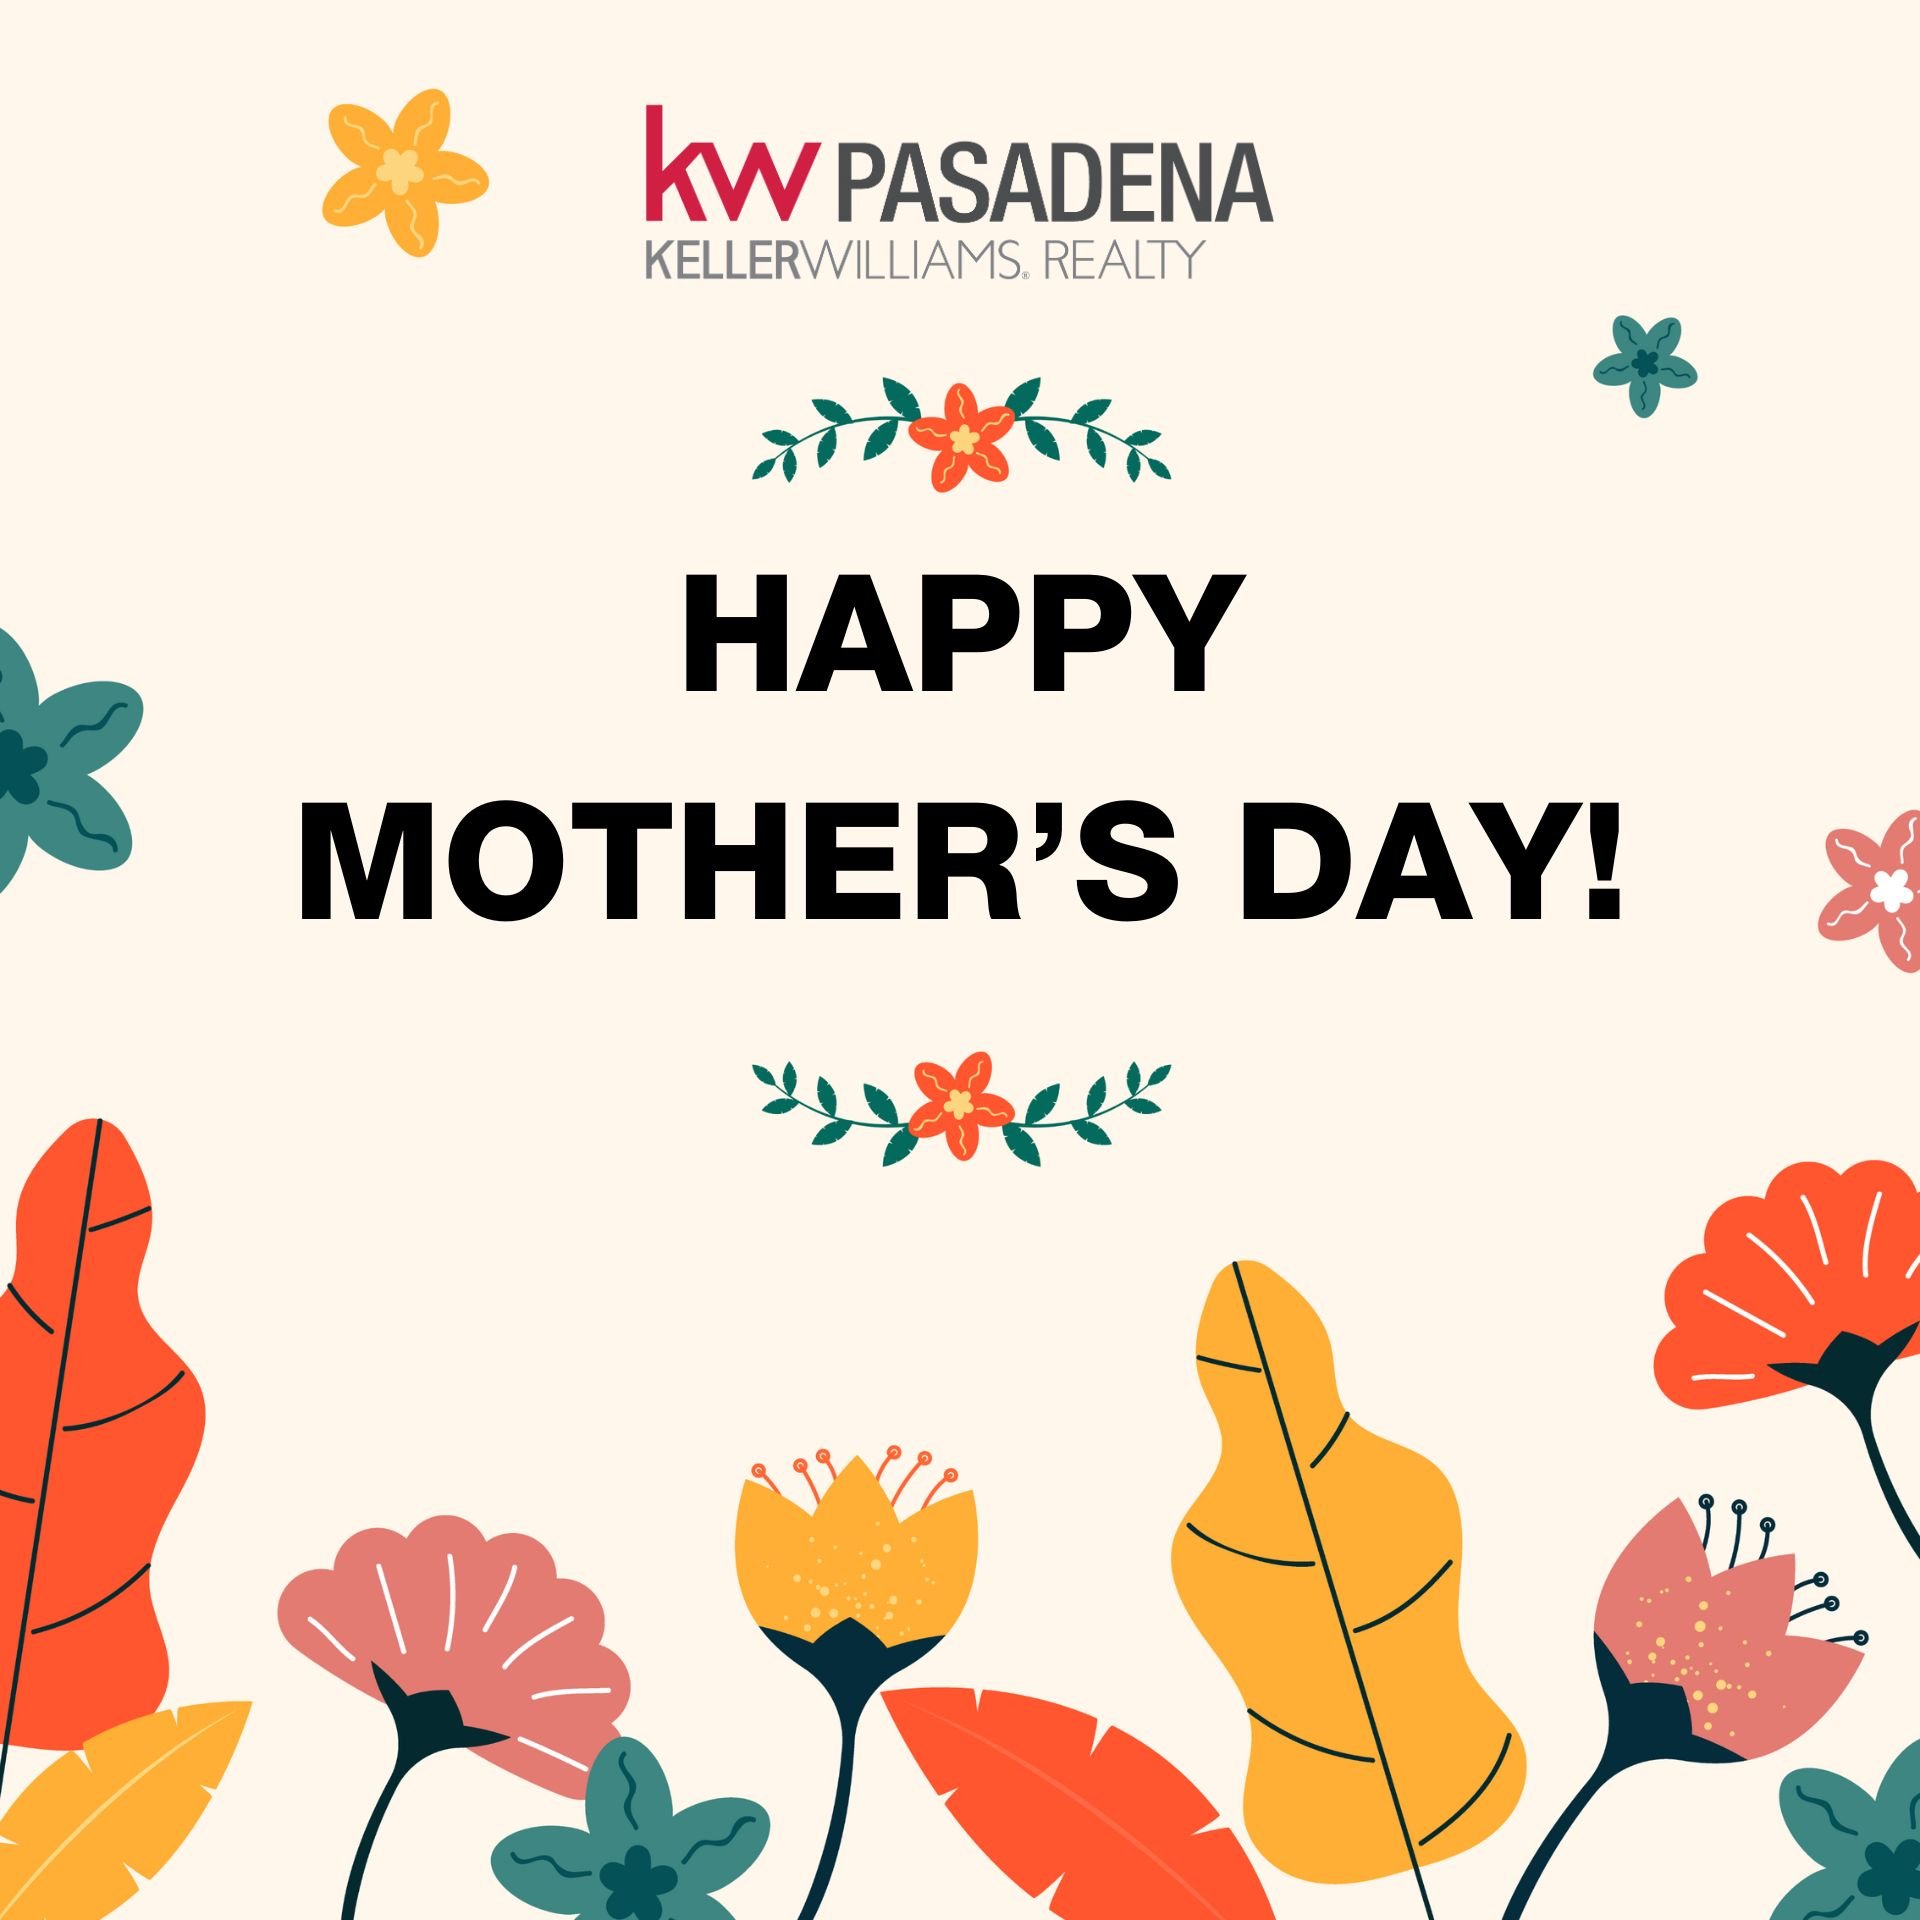 🌸 Happy Mother's Day to all the incredible mothers at Keller Williams Pasadena! Your dedication and hard work in real estate inspire us every day. Today, we celebrate you and the amazing balance you bring to both your families and careers. Thank you